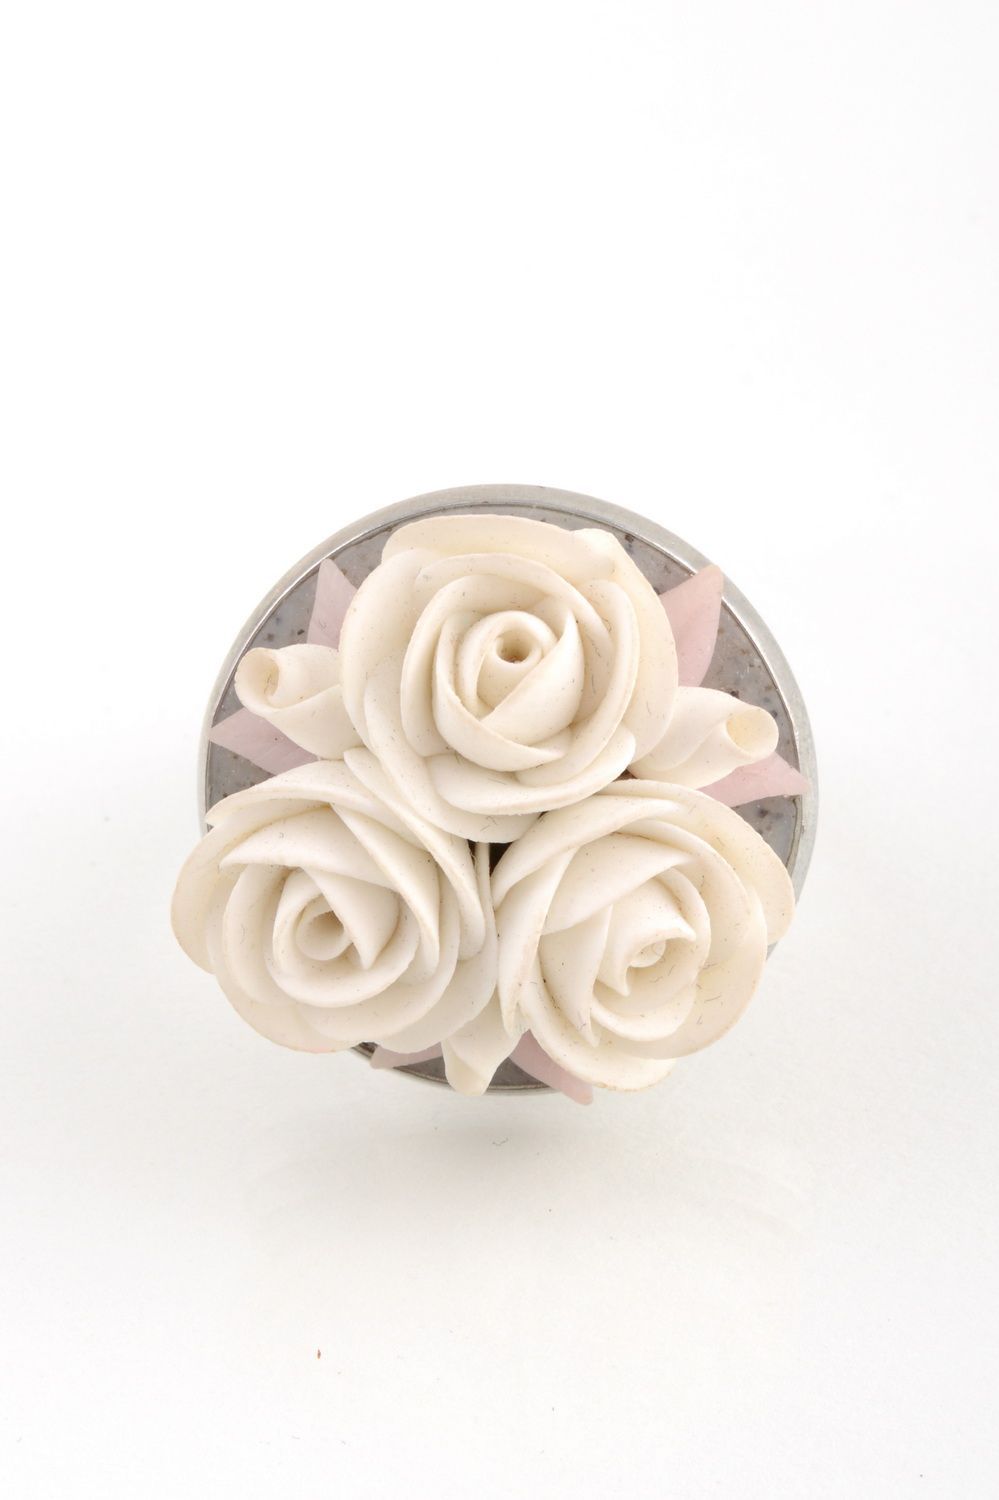 Handmade designer jewelry ring with white polymer clay flowers on metal basis photo 2